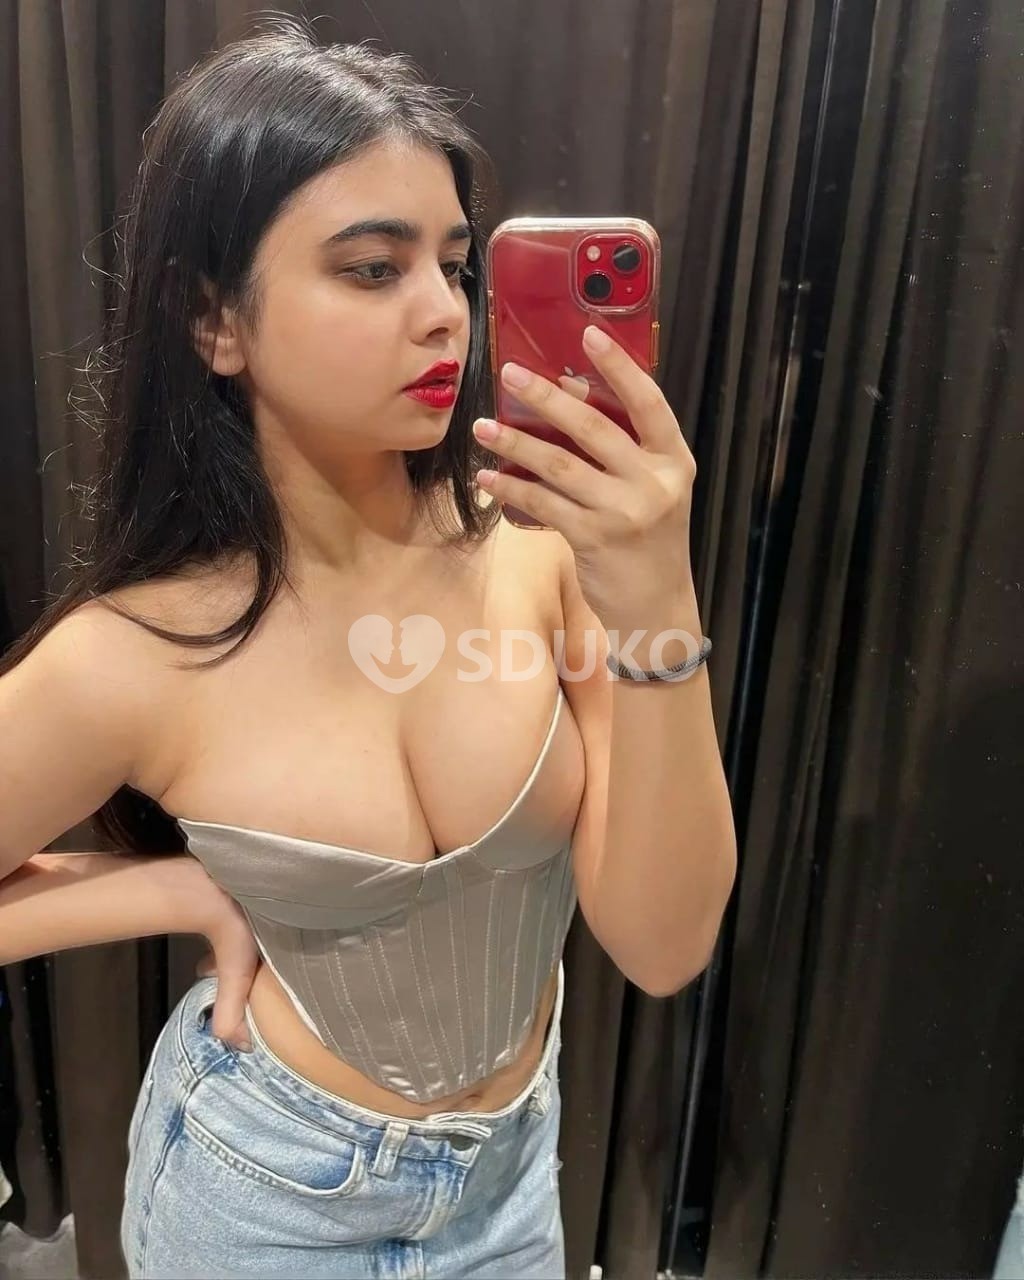 Lajpat Nagar ❤️24x7 AFFORDABLE CHEAPEST RATE SAFE CALL GIRL SERVICE